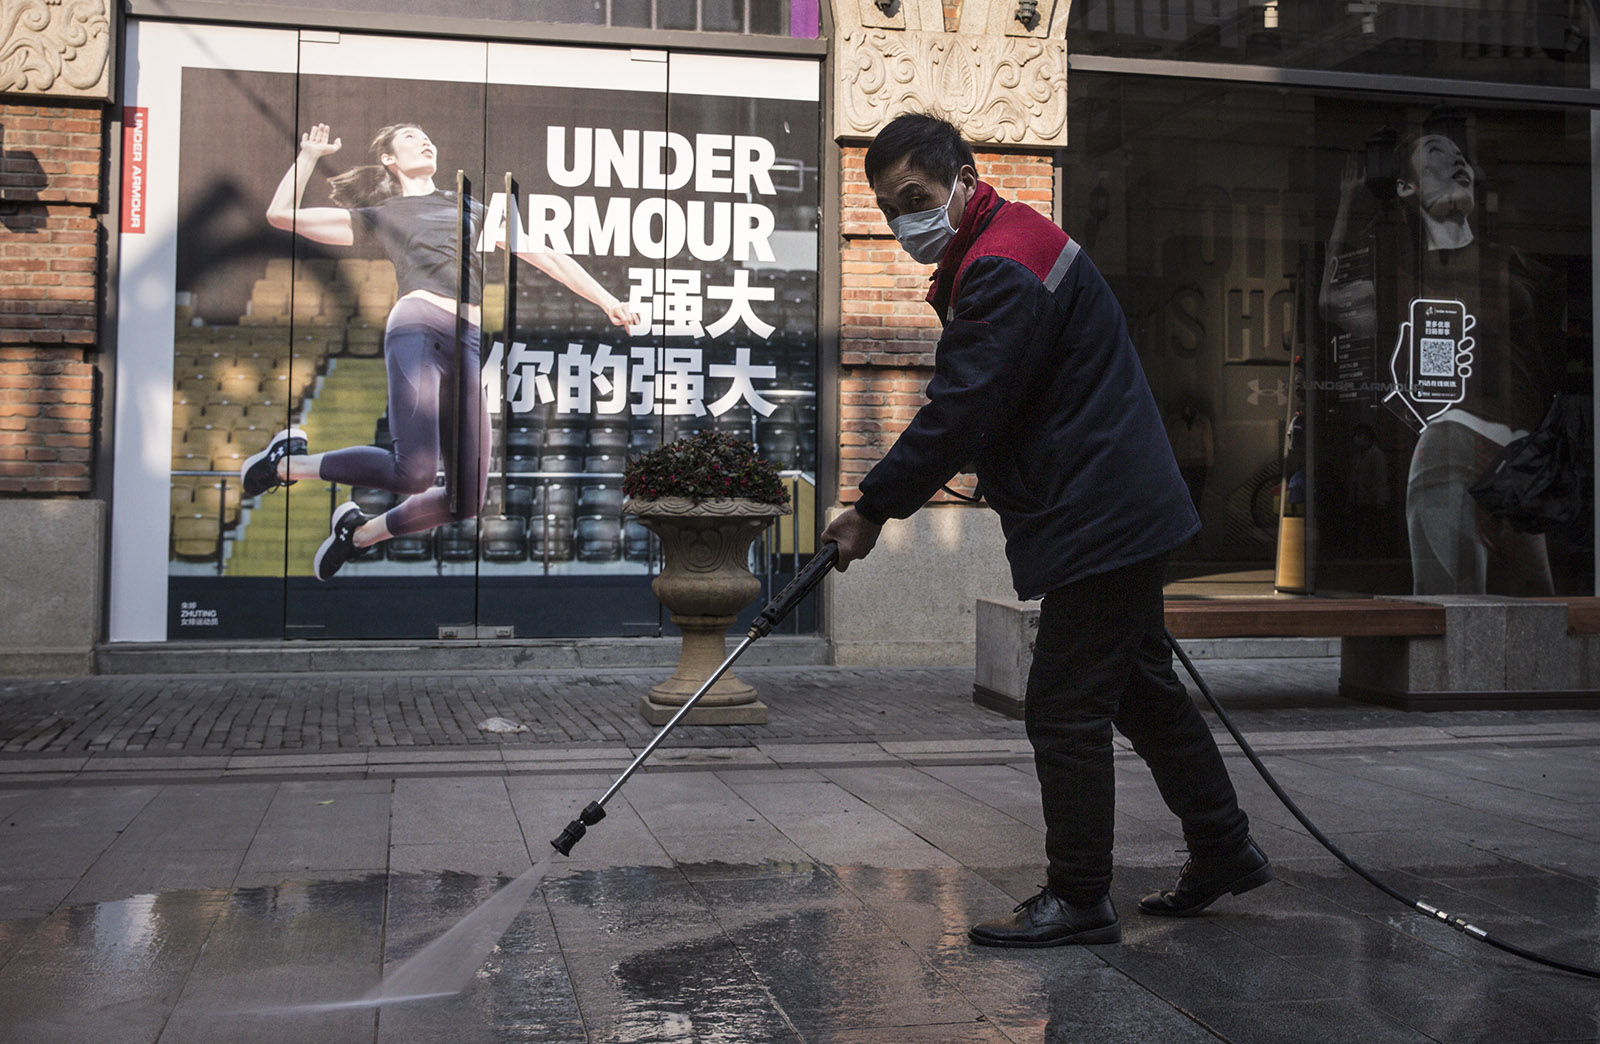 A street-cleaner working in a virtually deserted shopping precinct during the coronavirus lockdown of Wuhan, Hubei province, China, February 3, 2020